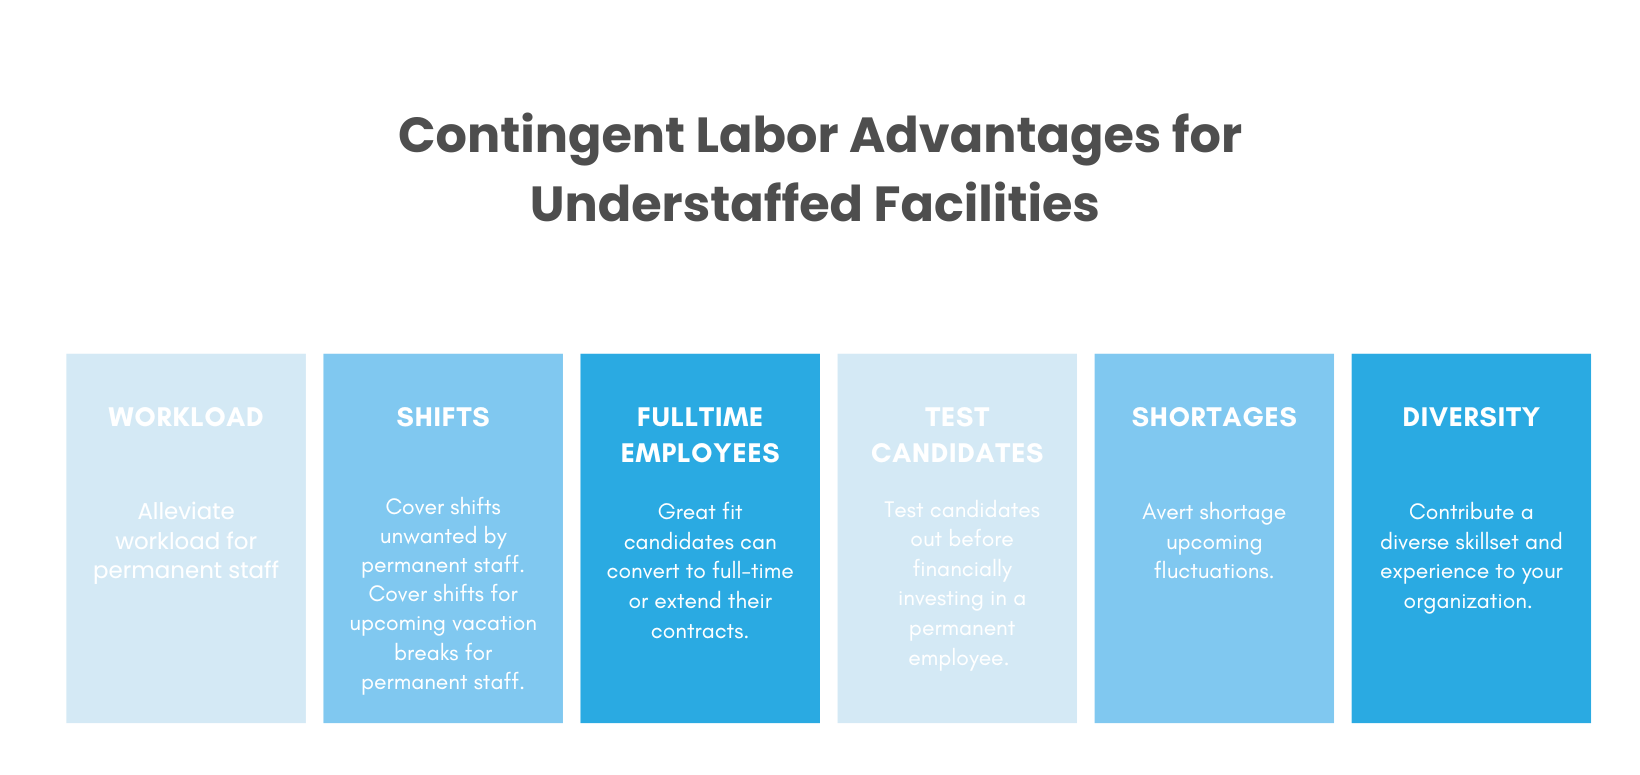 Advantages of contingent labor for understaffed facilities chart